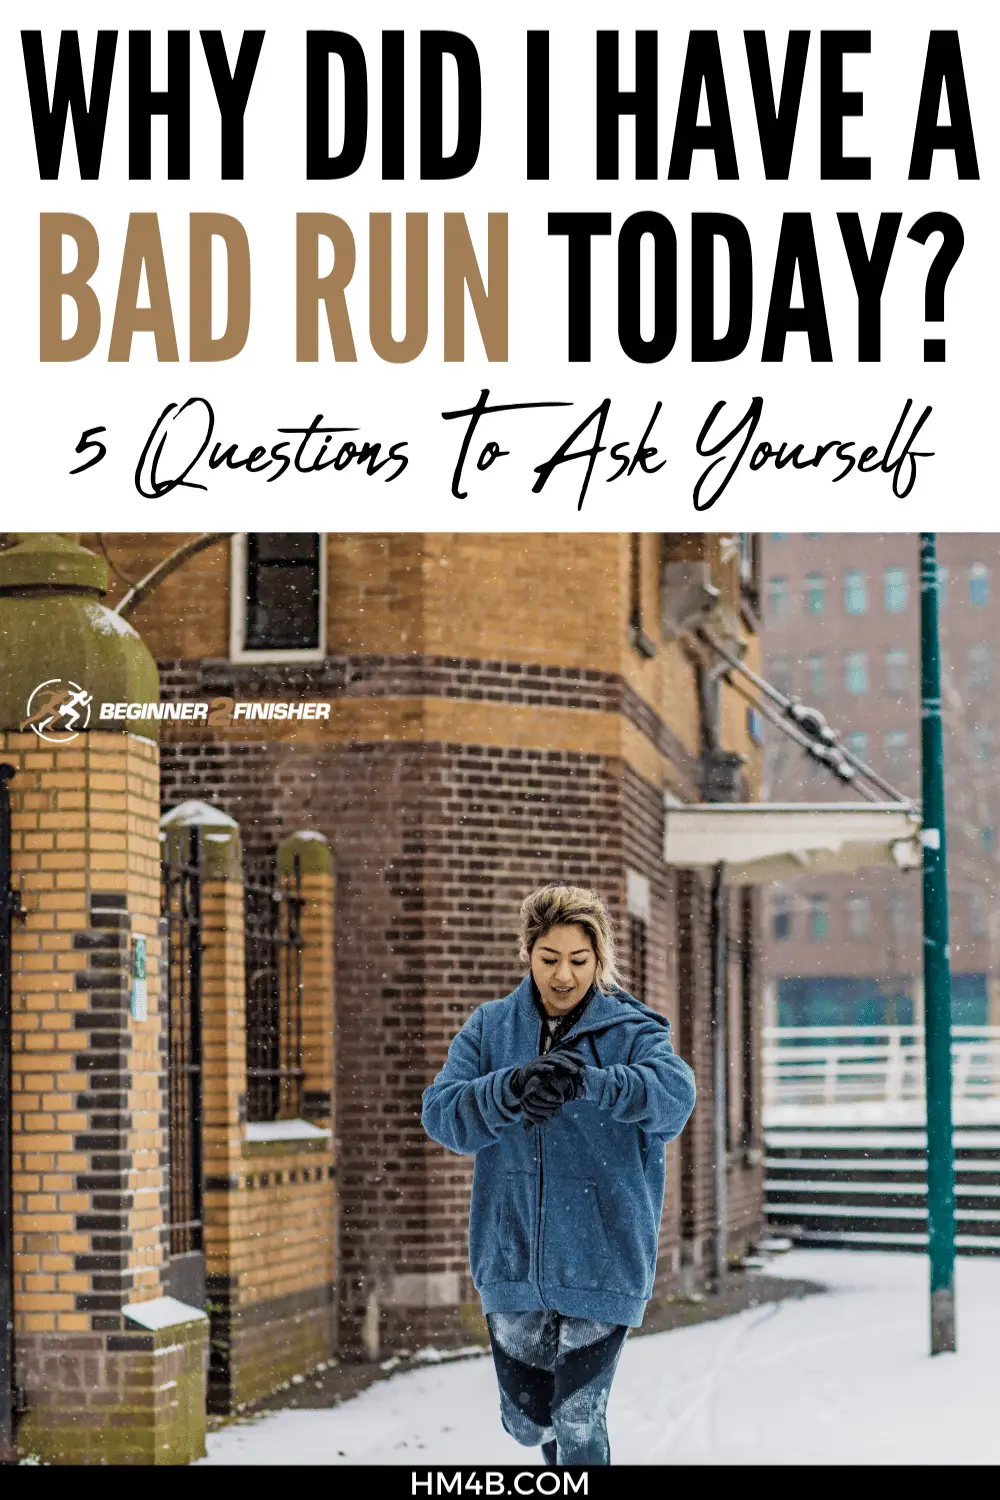 Why Did I Have A Bad Run Today? 5 Questions To Ask Yourself